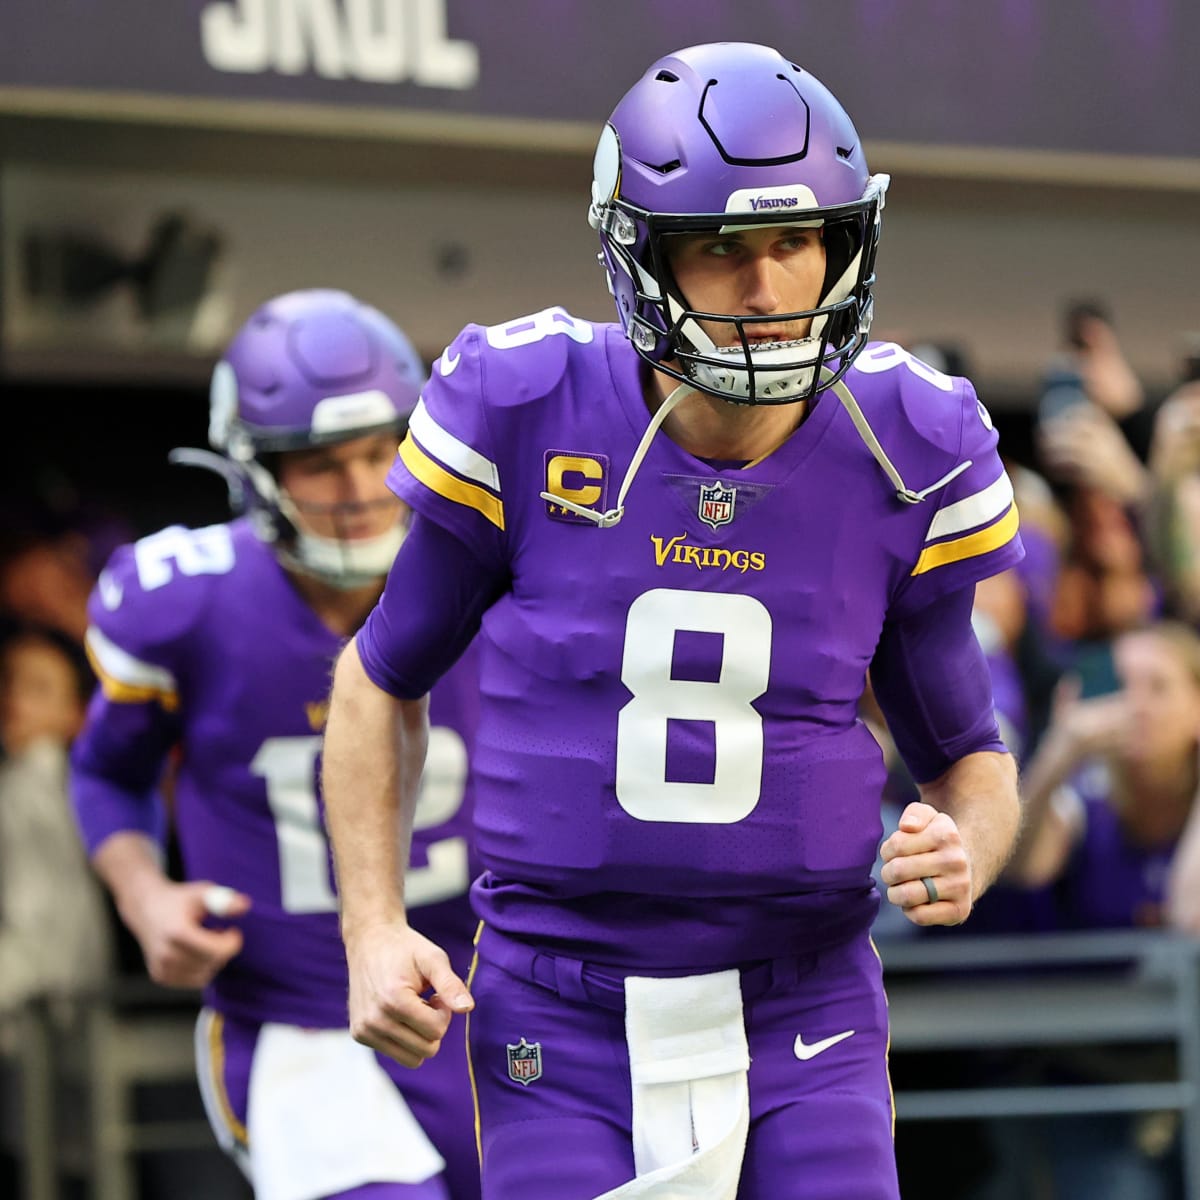 Six takeaways from watching Kirk Cousins in Netflixs Quarterback picture pic